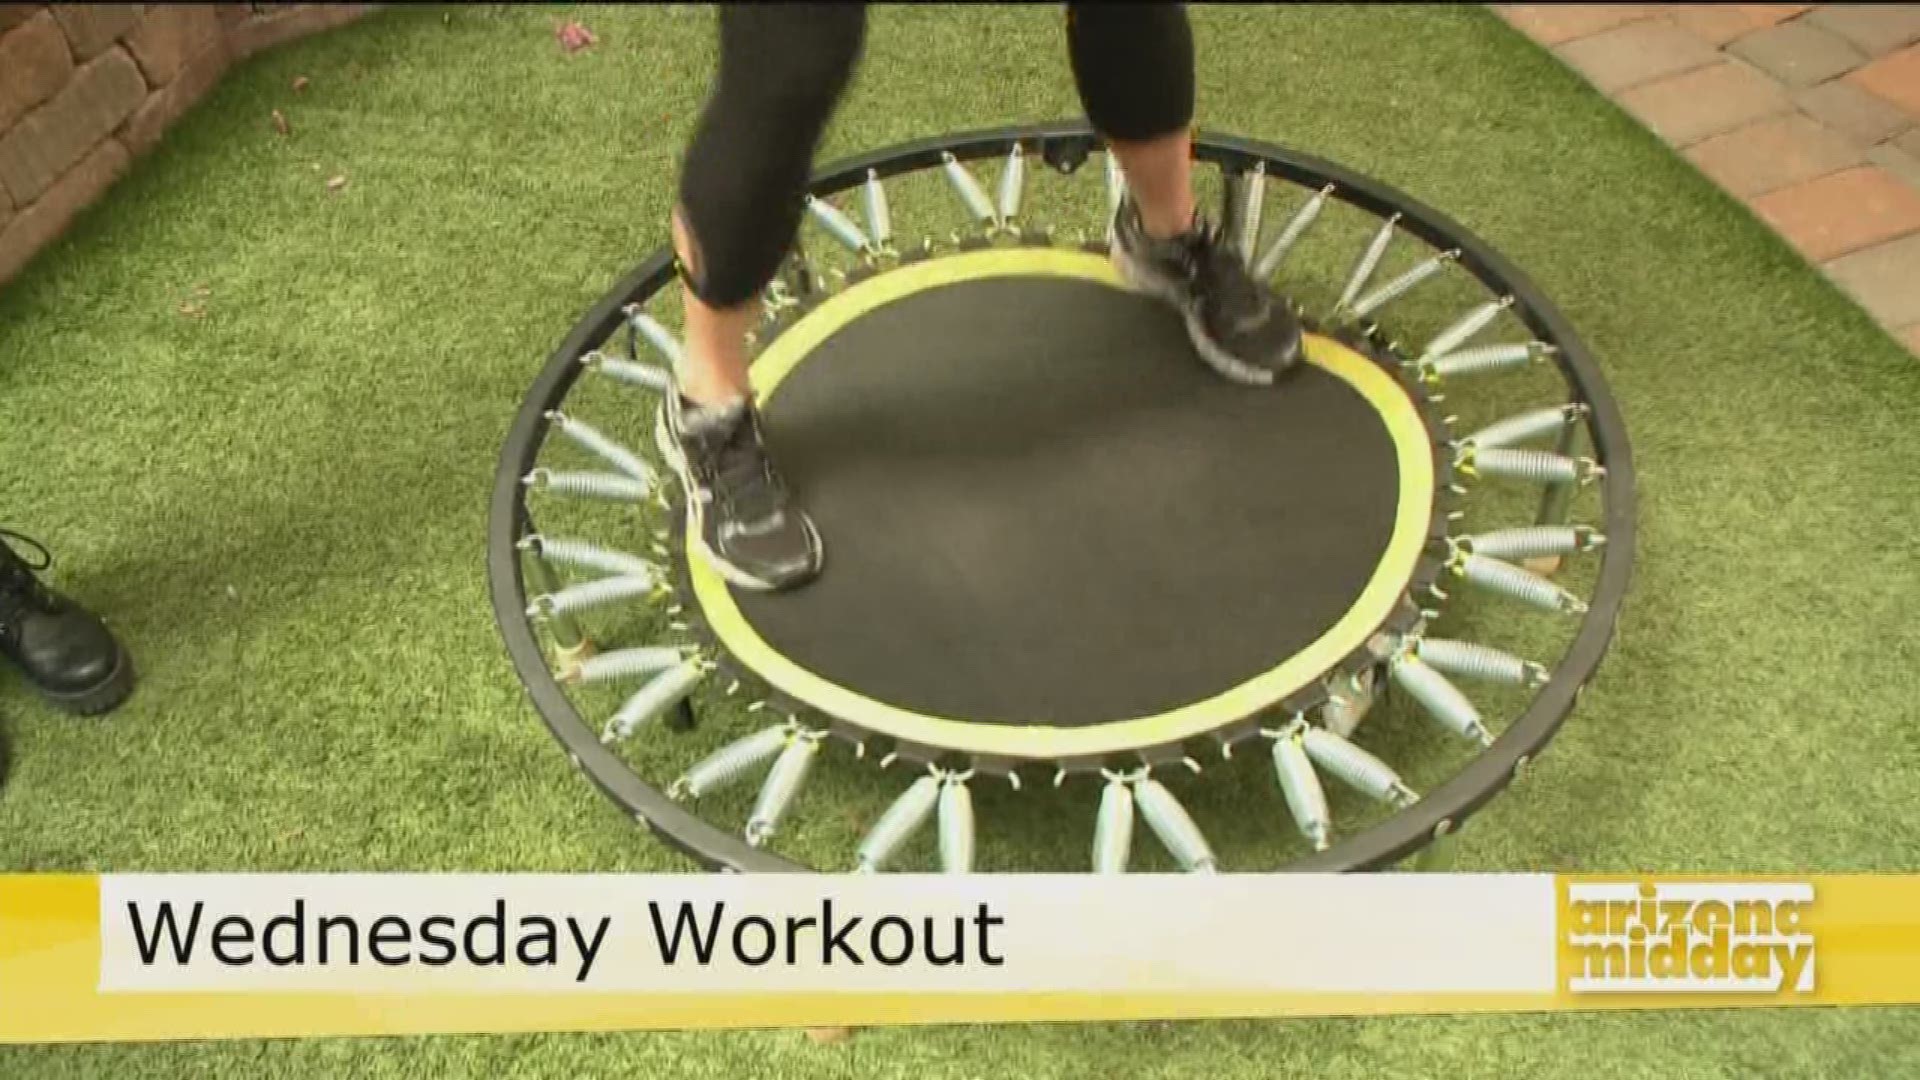 Angela Jordan gives us tips and tricks to getting fit on a trampoline!